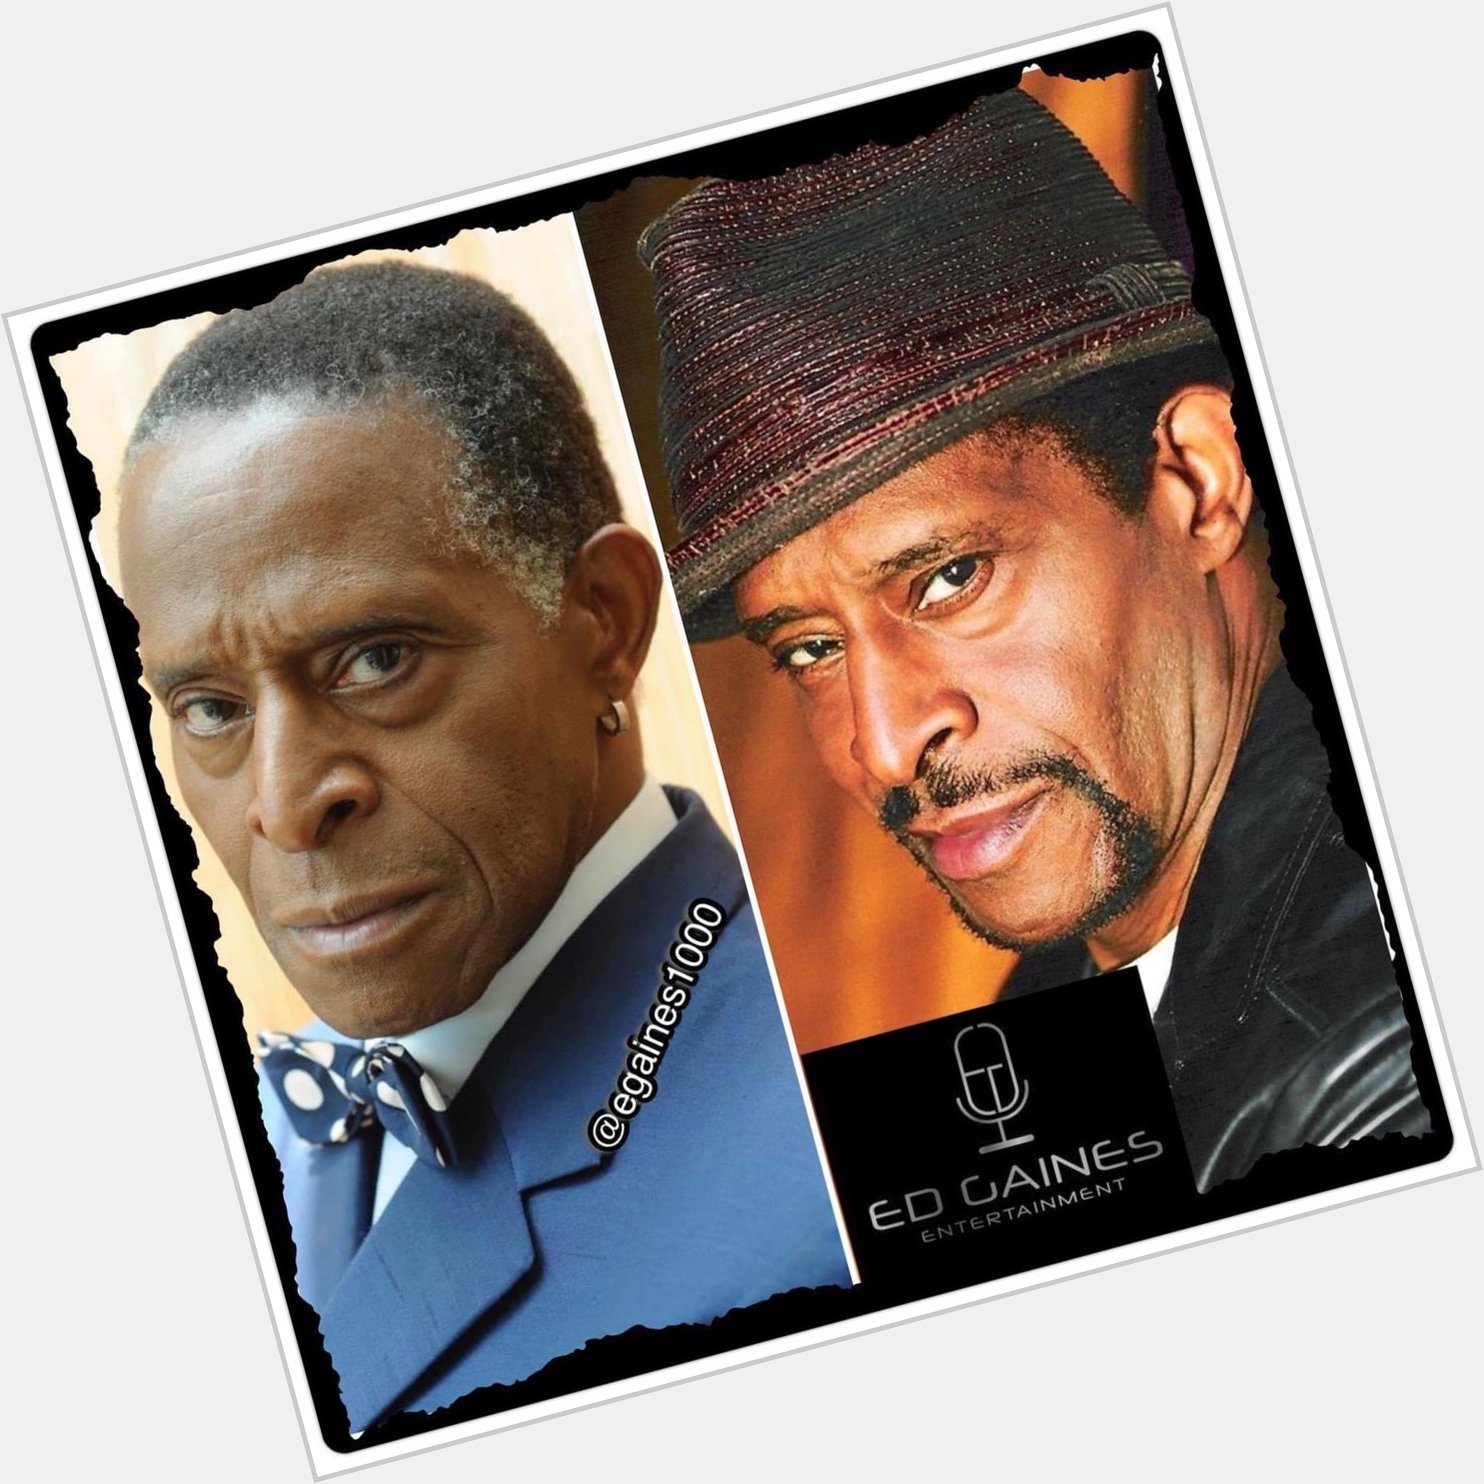 Happy Birthday Antonio Fargas! Best wishes and have a great day. 